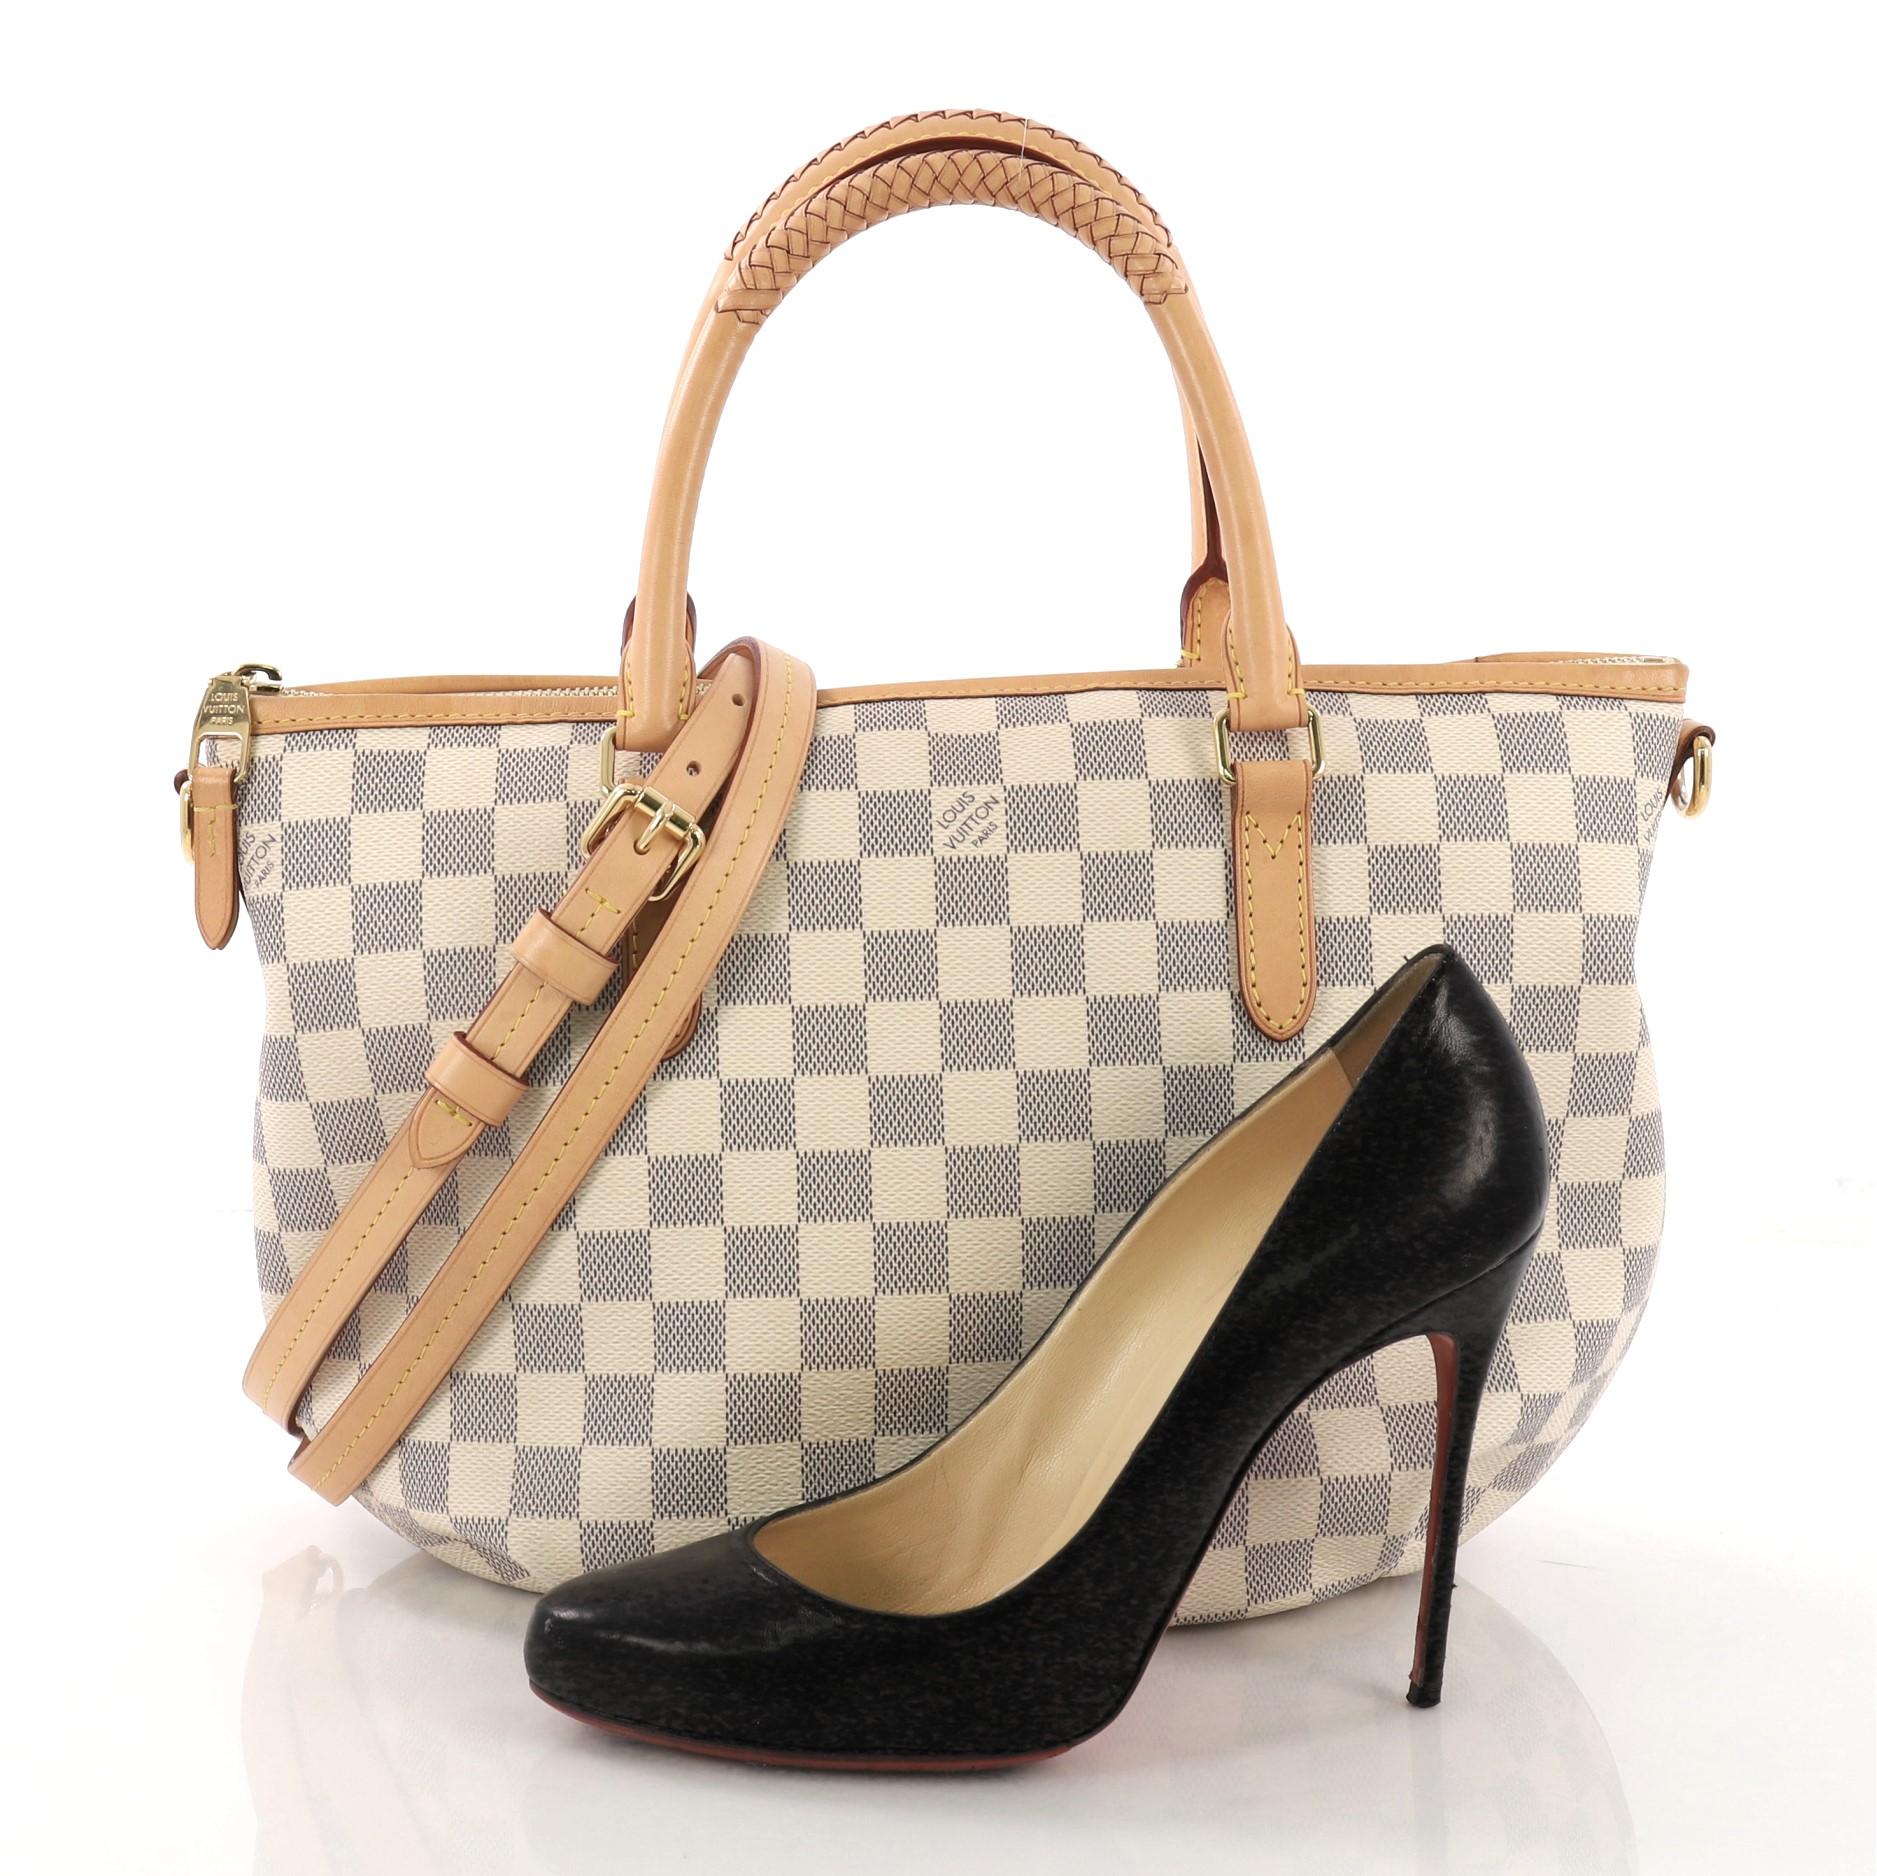 This Louis Vuitton Riviera Handbag Damier PM, crafted from damier azur coated canvas, features dual braided handles, vachetta leather trim, and gold-tone hardware. Its zip closure opens to a beige fabric interior with slip pockets. Authenticity code